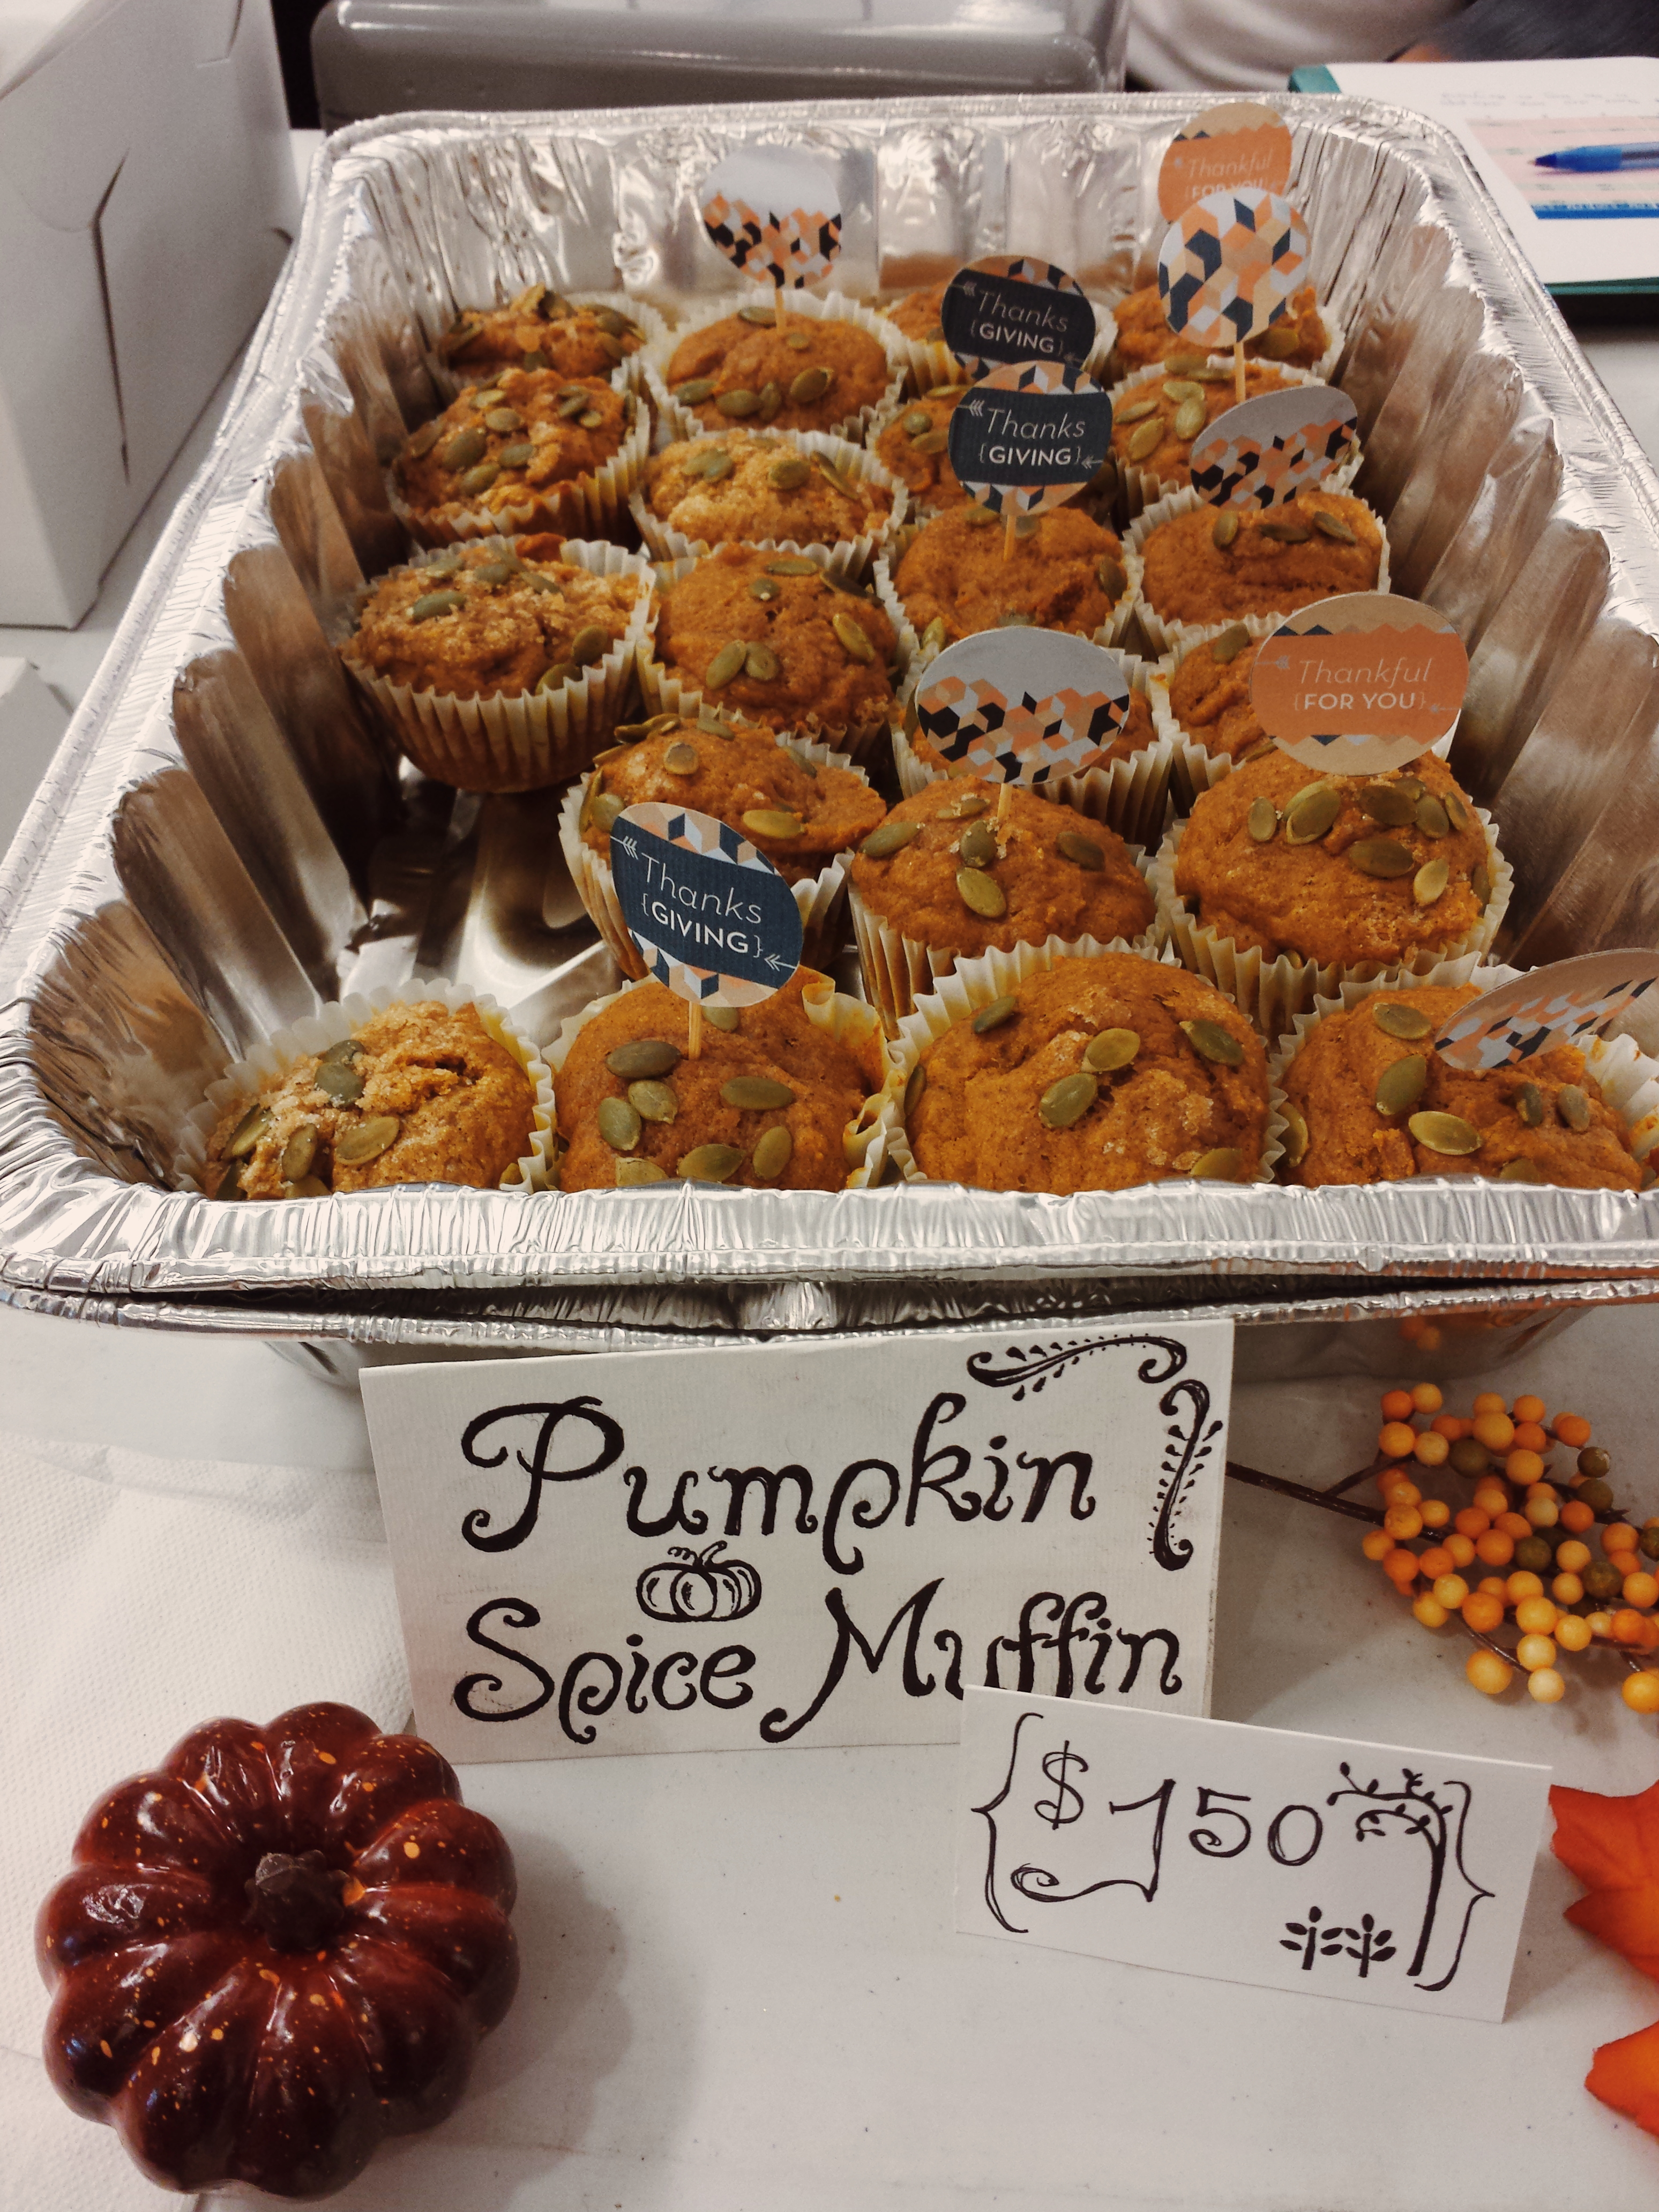 A tray of pumpkin spice muffins on a table. There is a hand-drawn sign with the price sits in front of the tray along with plastic pumpkins or squash.